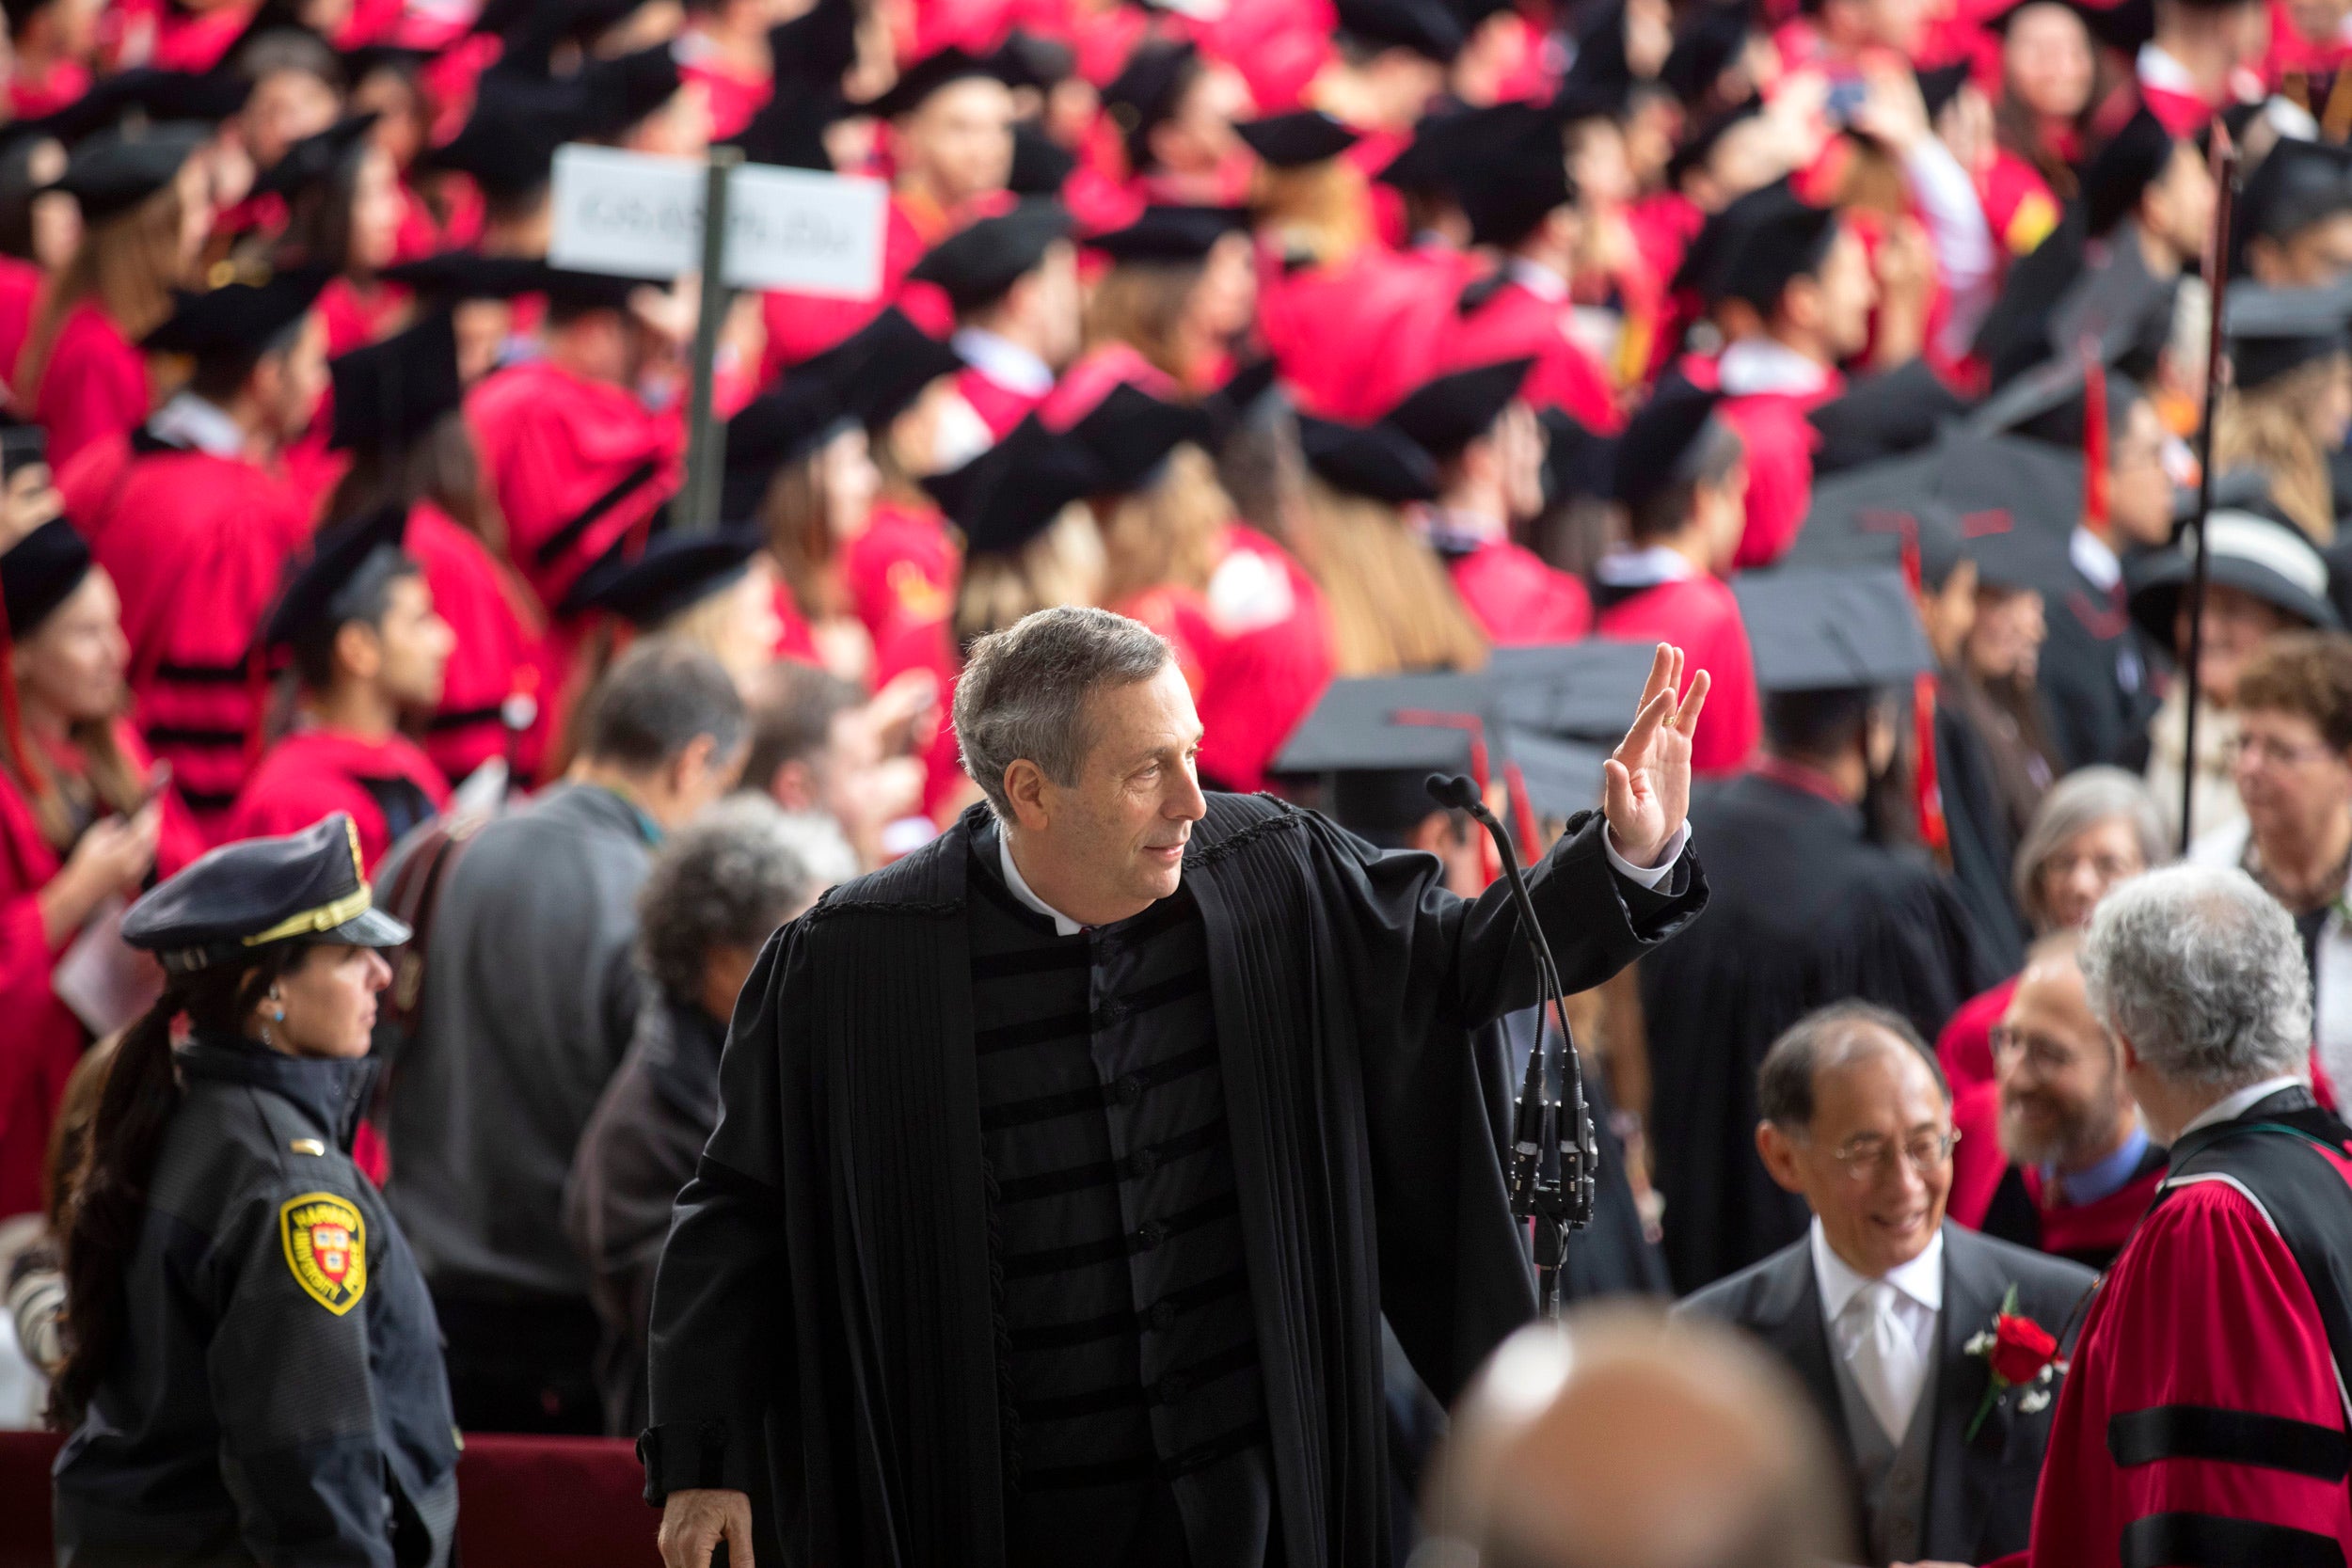 The president led the procession to Morning Exercises in Tercentenary Theatre for Harvard’s 368th Commencement.